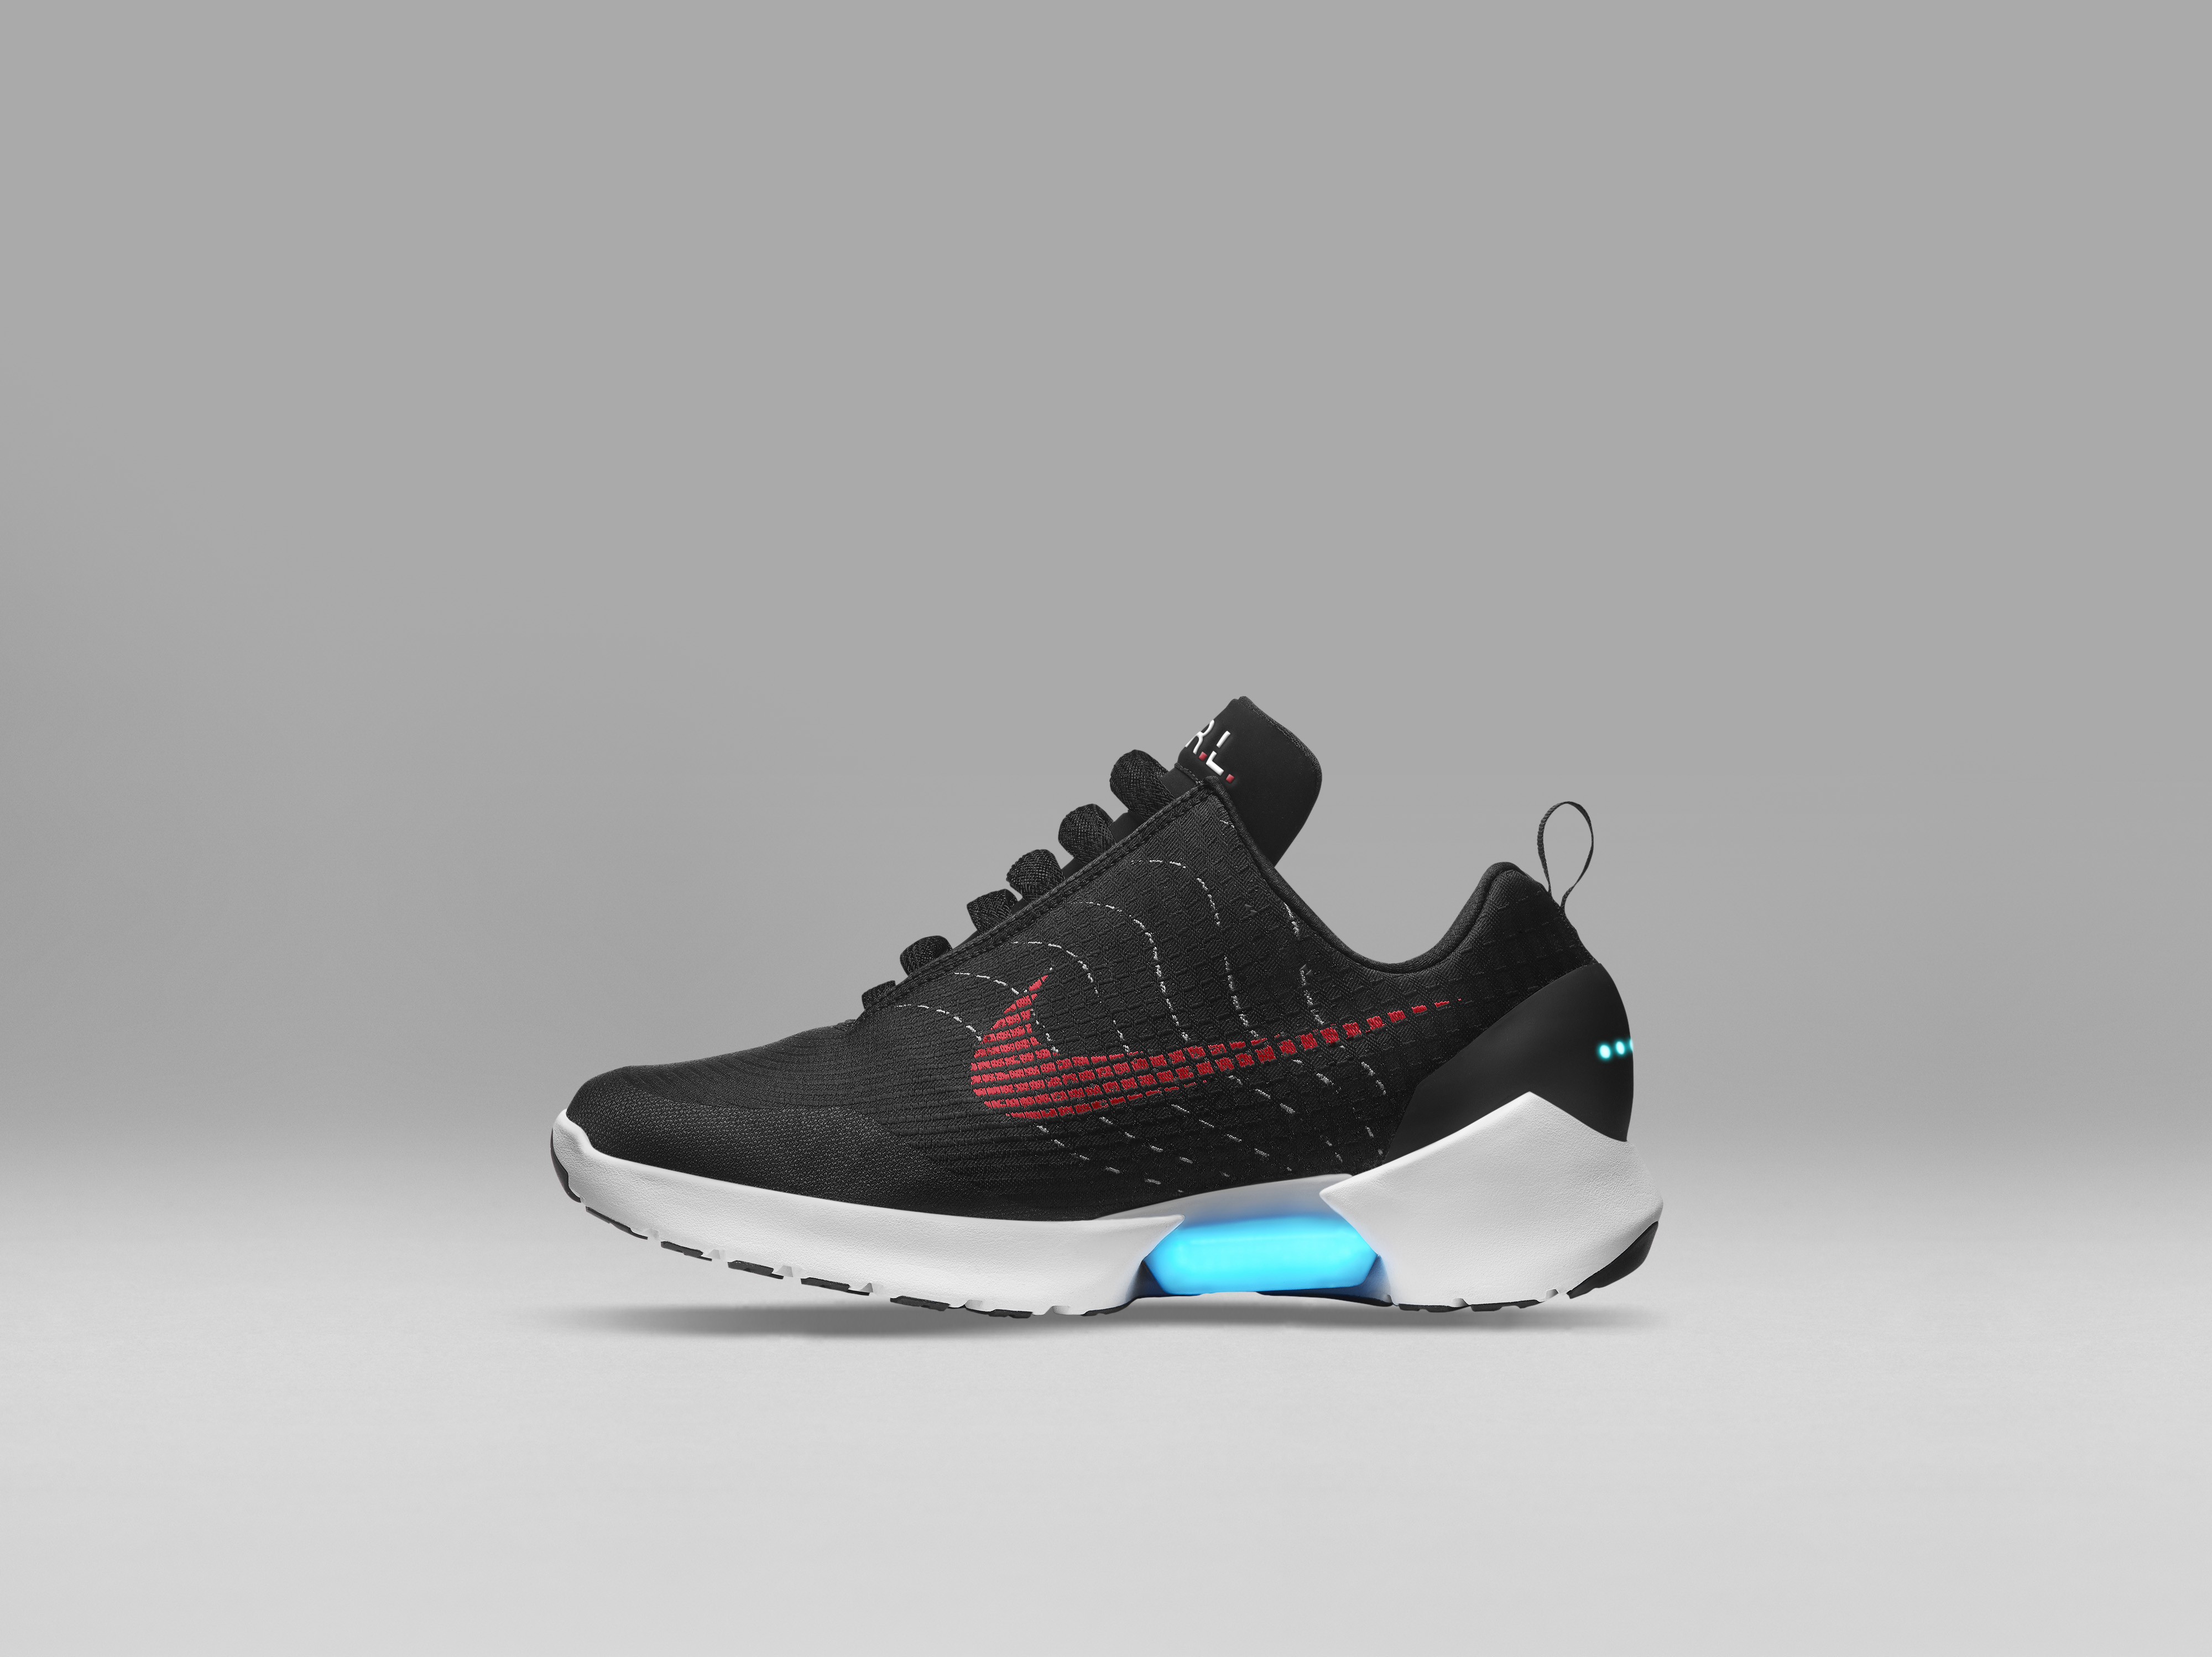 Nike HyperAdapt 1.0 Archives - WearTesters